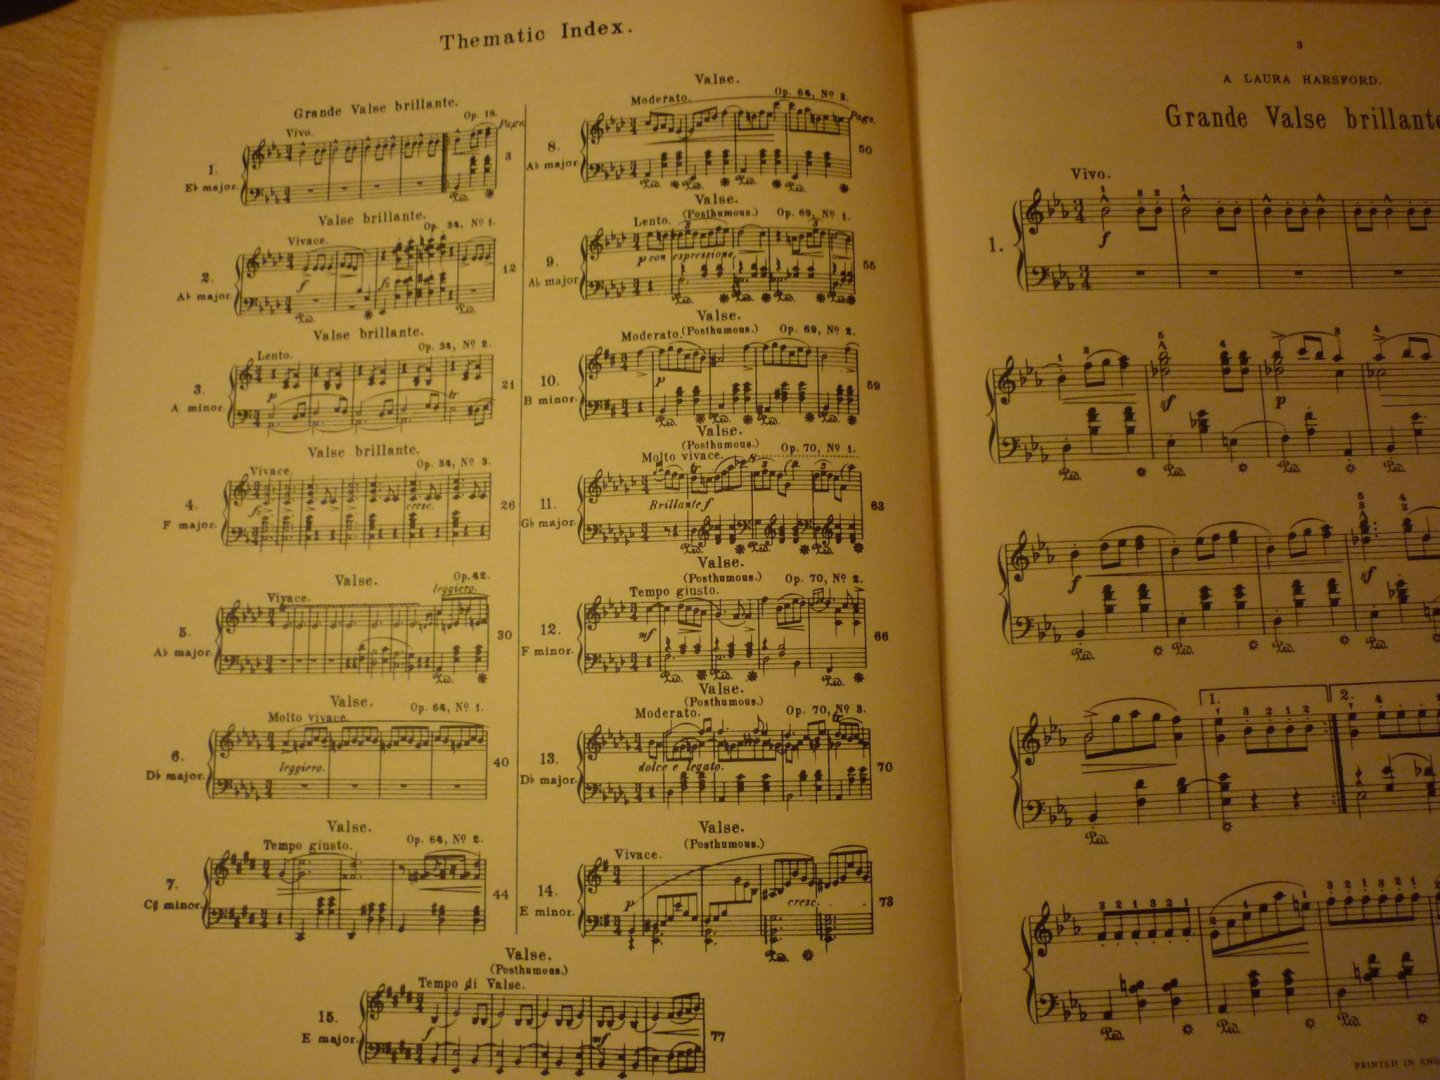 Chopin; Frederic - Complete Works for the Piano - Book I - Waltzes (Edited and fingered by Carl Mikuli. Historical and analytical comments by James Huneker. Schirmer Library Of Msc Clssc)